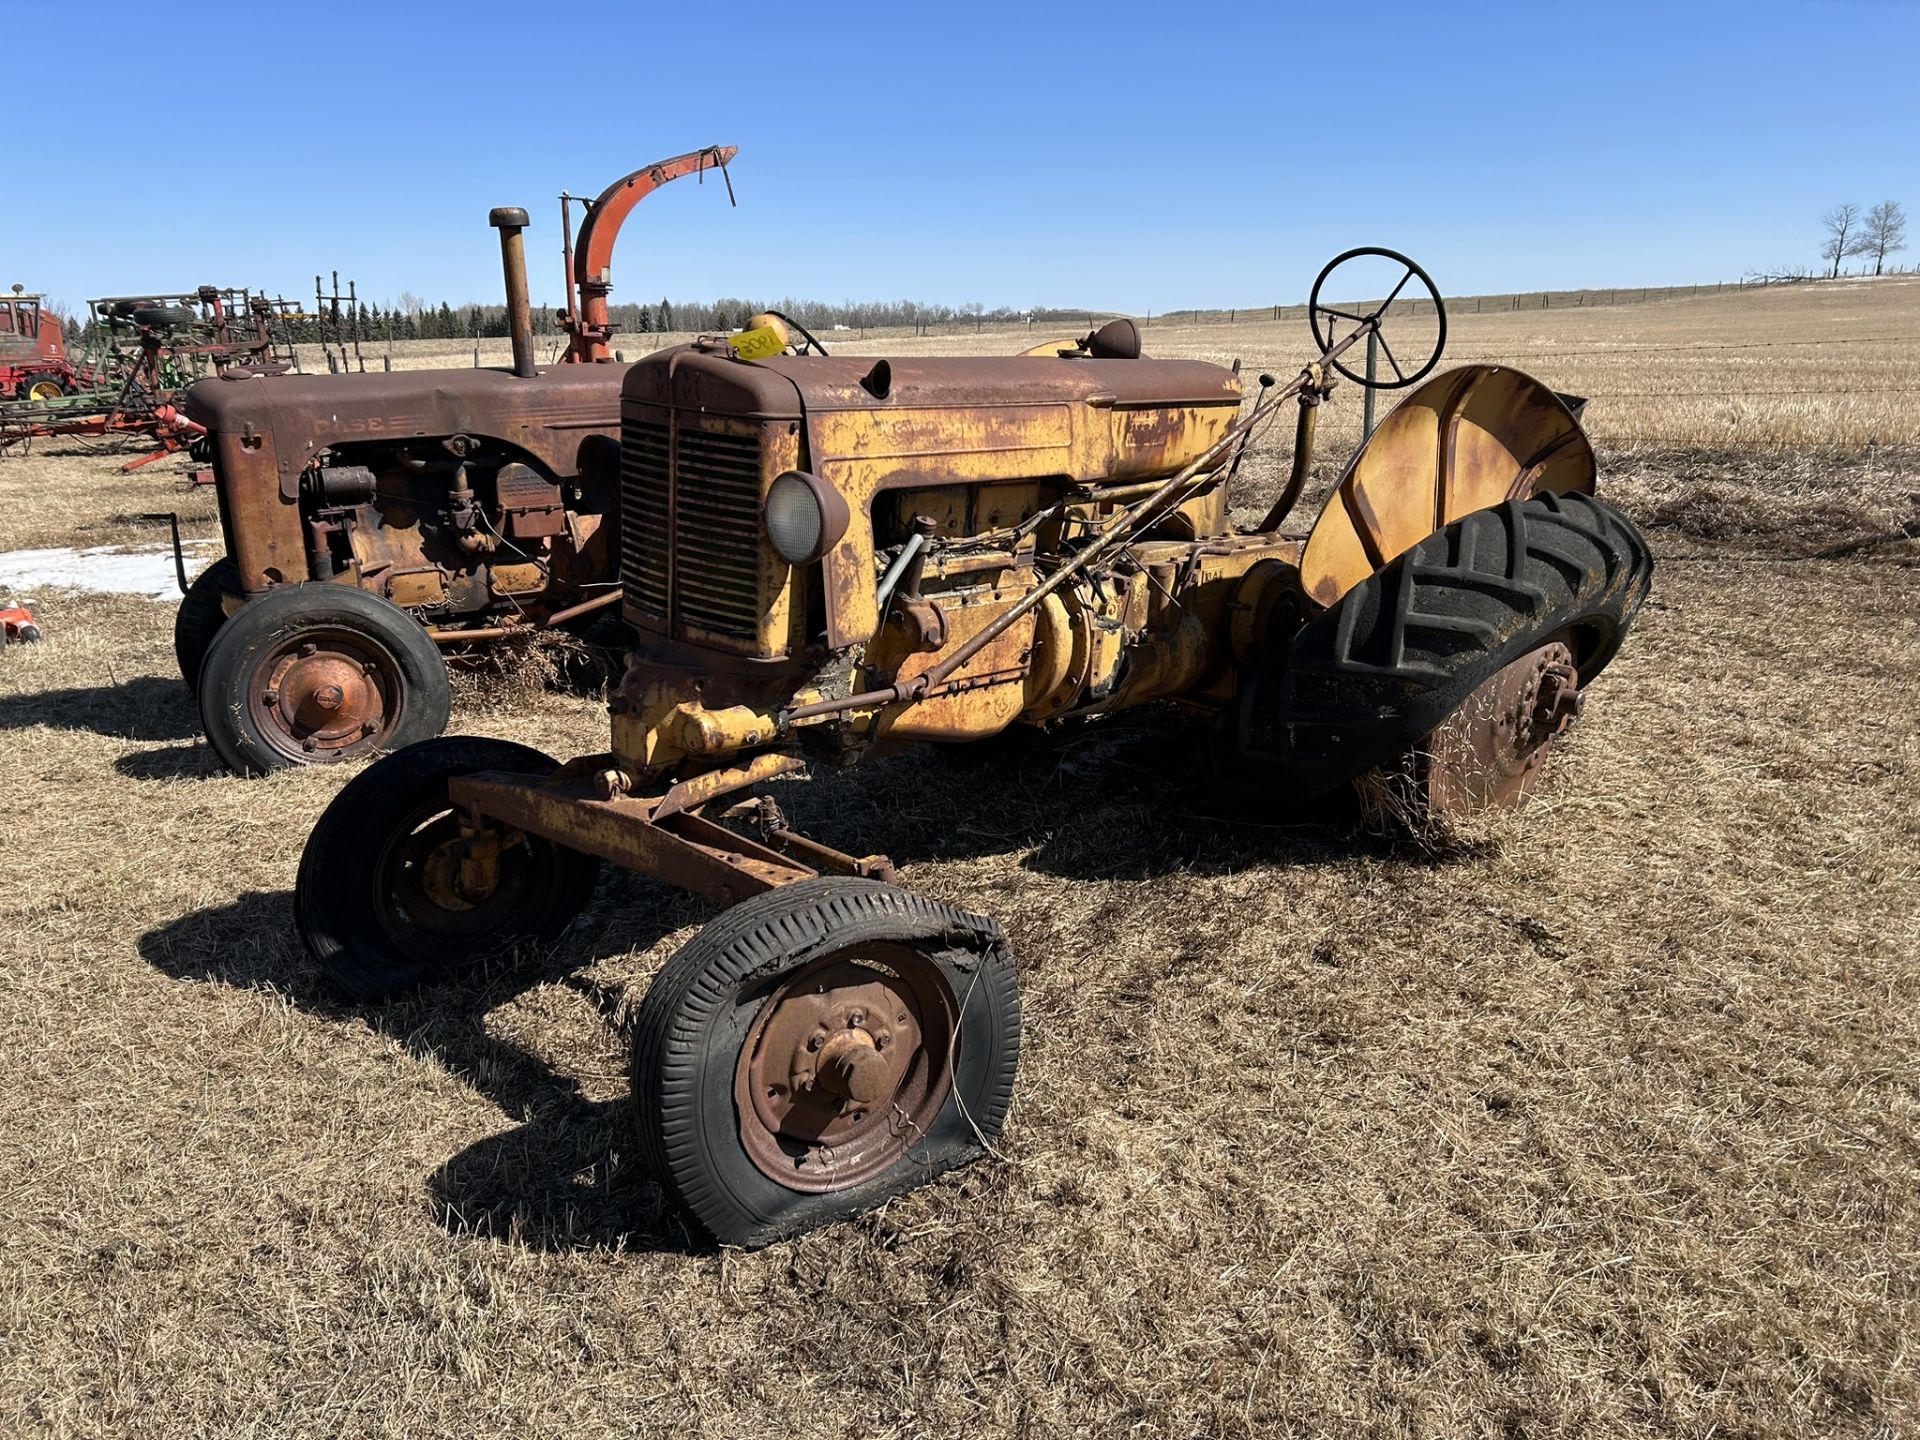 **OFFSITE** 1944 MINNEAPOLIS MOLINE MOD. 7AE TRACTOR S/N 0094900101 - LOCATED 40515 RANGE ROAD